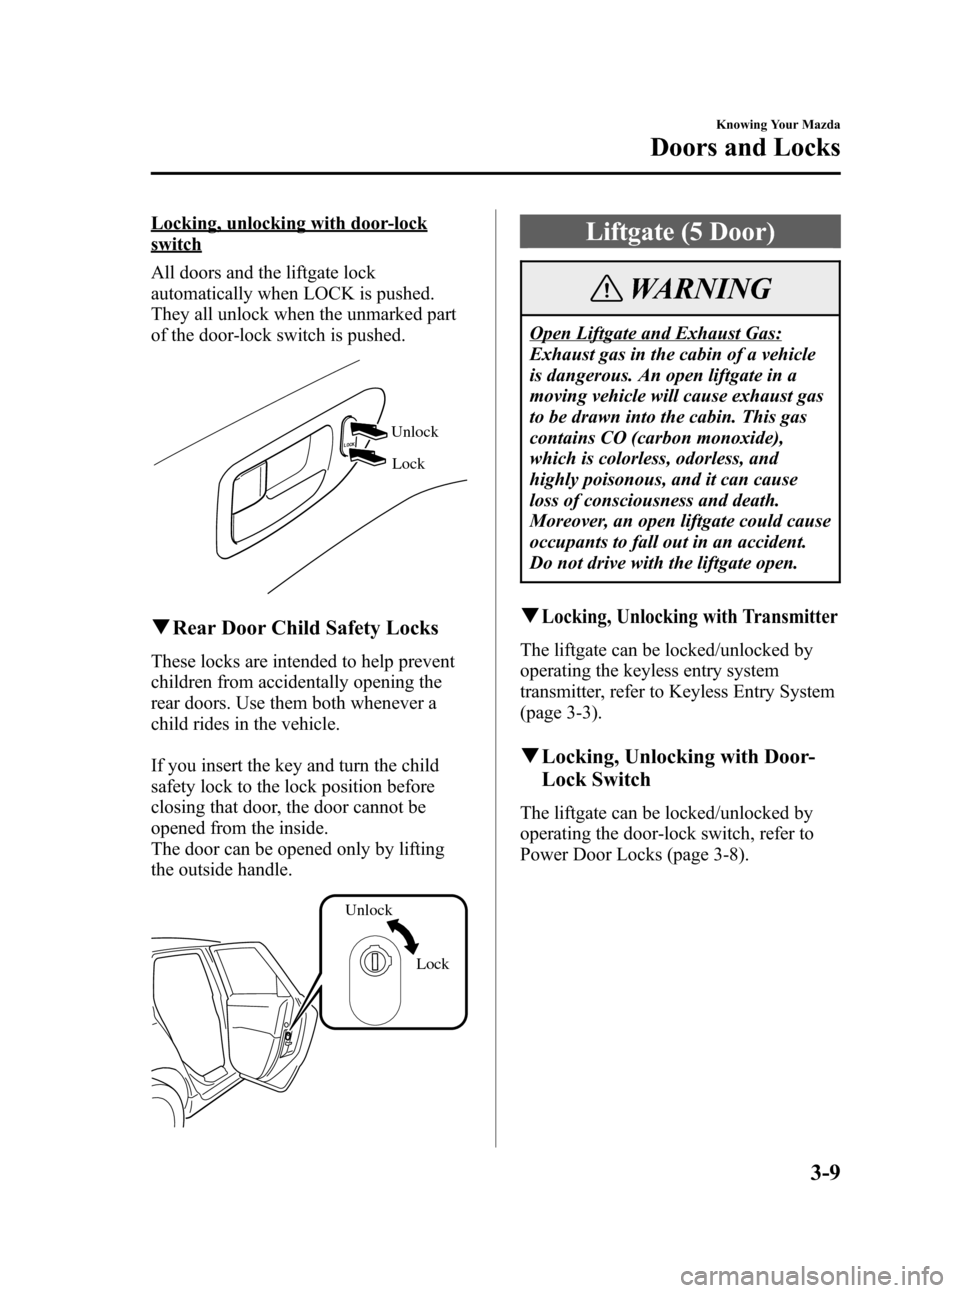 MAZDA MODEL 3 HATCHBACK 2006  Owners Manual (in English) Black plate (79,1)
Locking, unlocking with door-lock
switch
All doors and the liftgate lock
automatically when LOCK is pushed.
They all unlock when the unmarked part
of the door-lock switch is pushed.